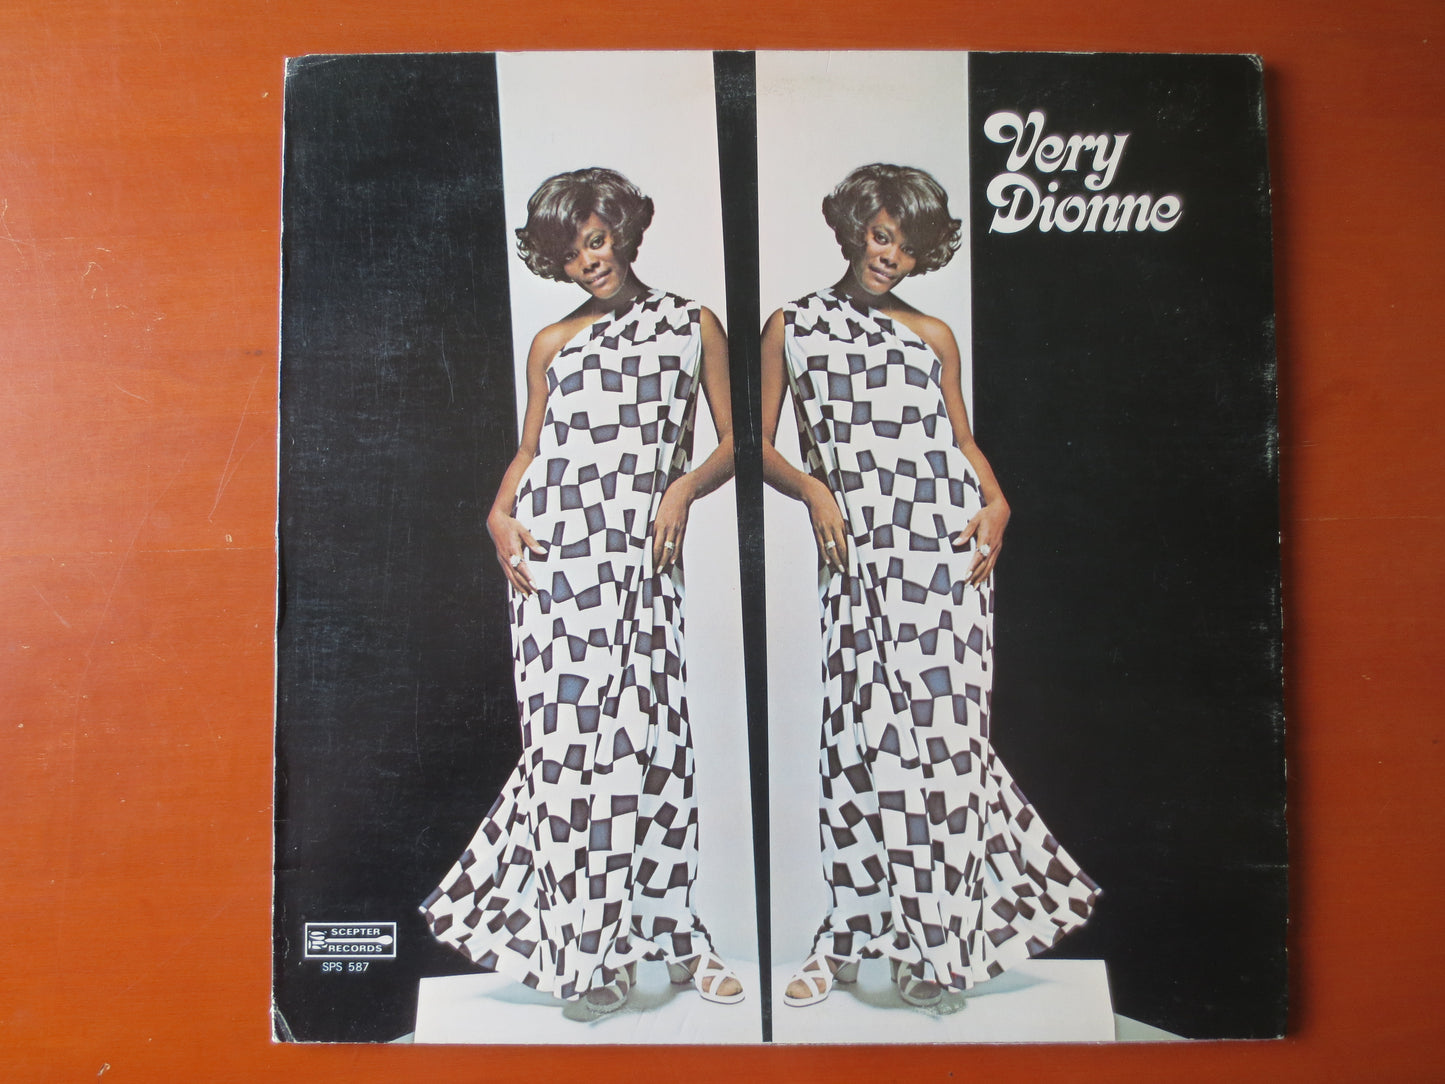 DIONNE WARWICKE, Very DIONNE, Pop Record, Vintage Vinyl, Record Vinyl, Records, Vinyl Record, Vinyl Pop, lps, 1970 Records